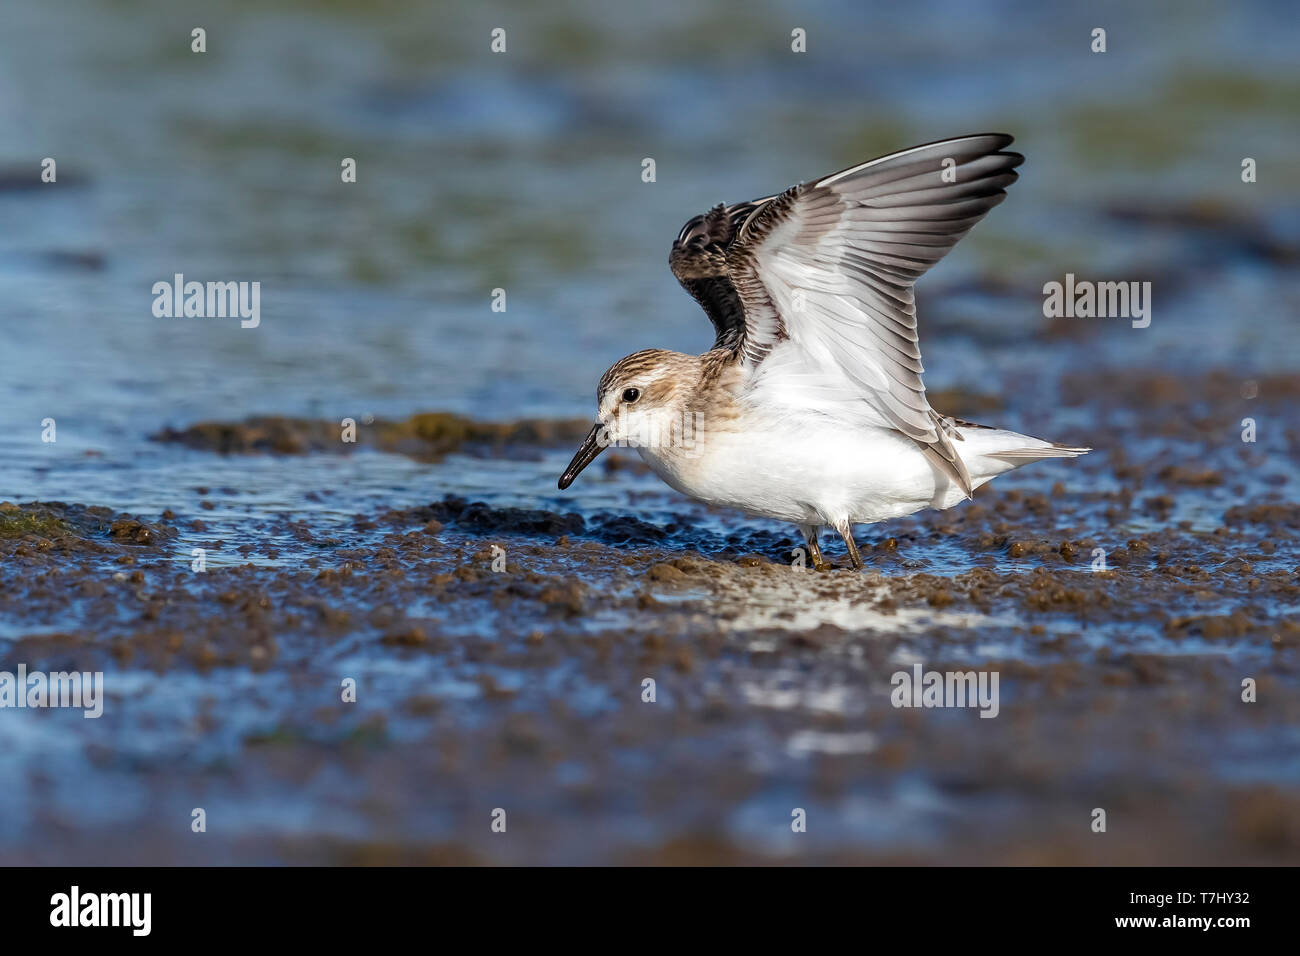 First-winter Semipalmated Sandpiper walking on mudflat in Cabo Da Praia quarry, Terceira, Azores. October 03, 2018. Stock Photo